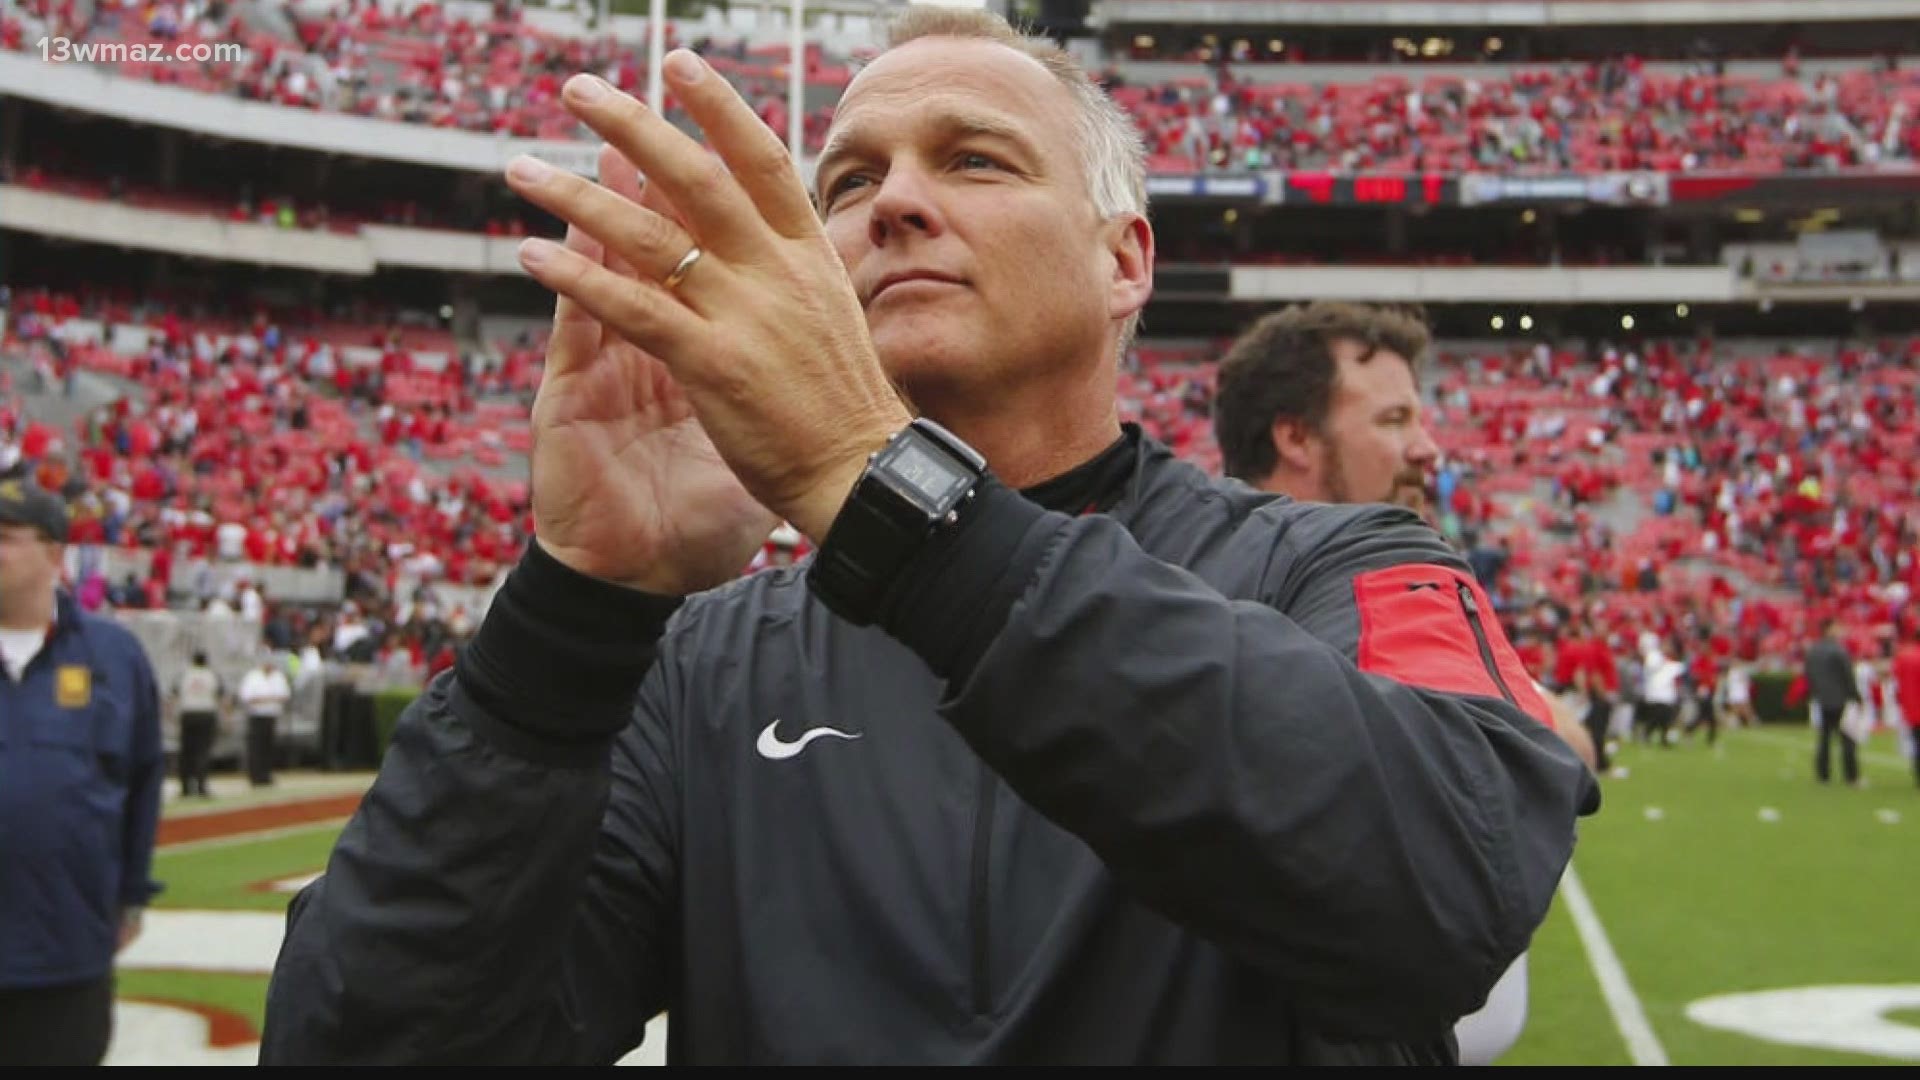 On his Twitter account, Richt said he chose to address his illness due to people noticing a difference in his walking